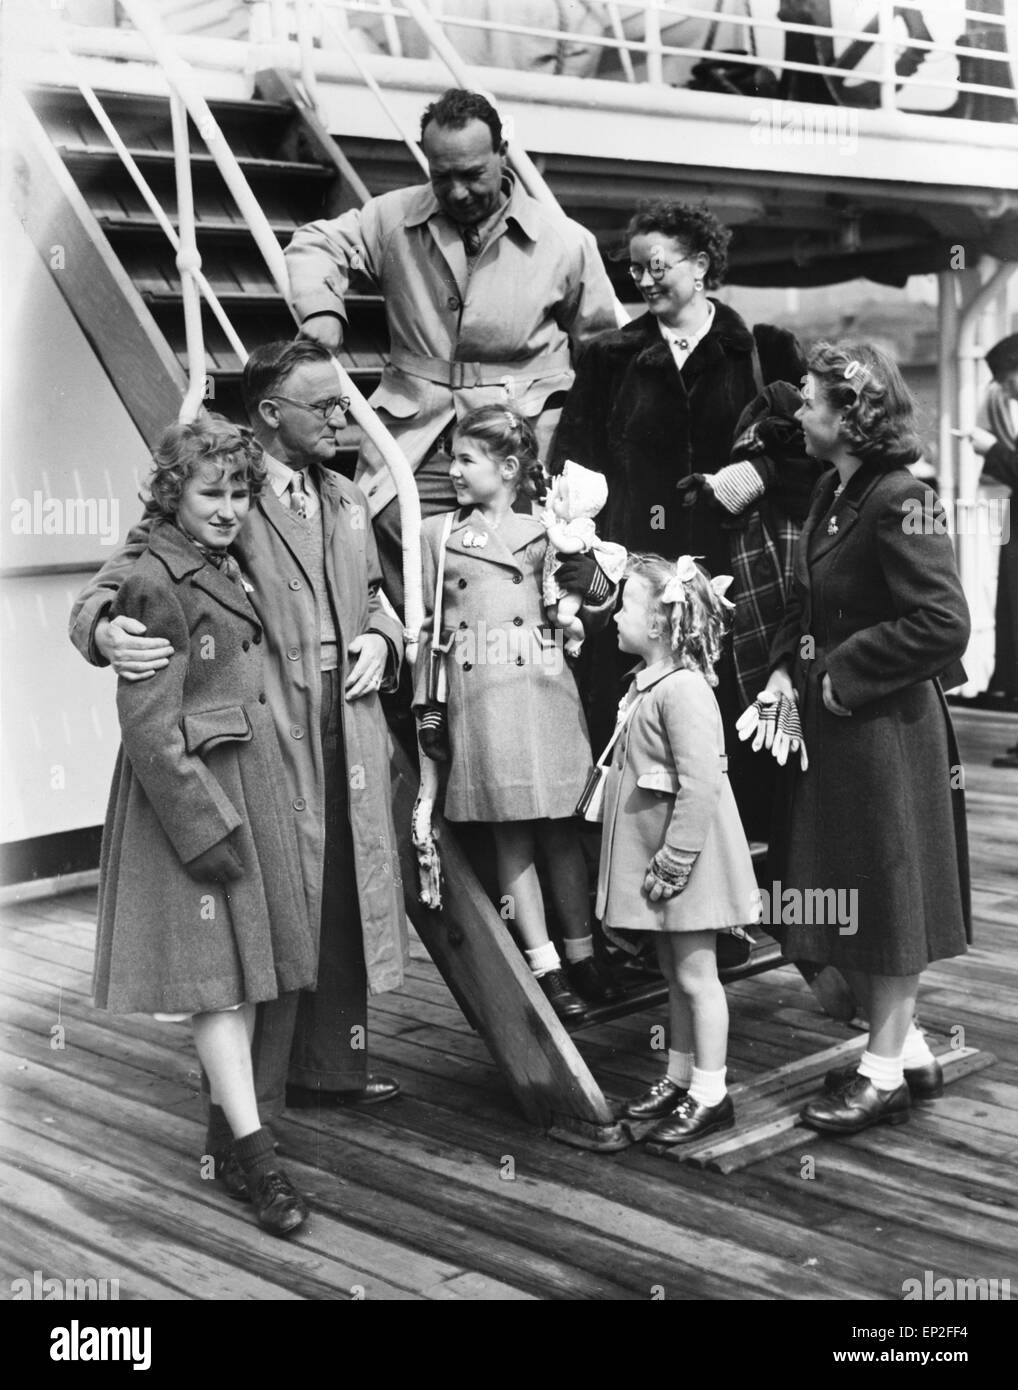 Two families on board the liner 'Cameronia' at Liverpool docks, having returned from Australia where they had emigrated eighteen months previously. The families were quoted as saying that they would 'rather die in England than live in Australia'. 8 April, 1951. Stock Photo